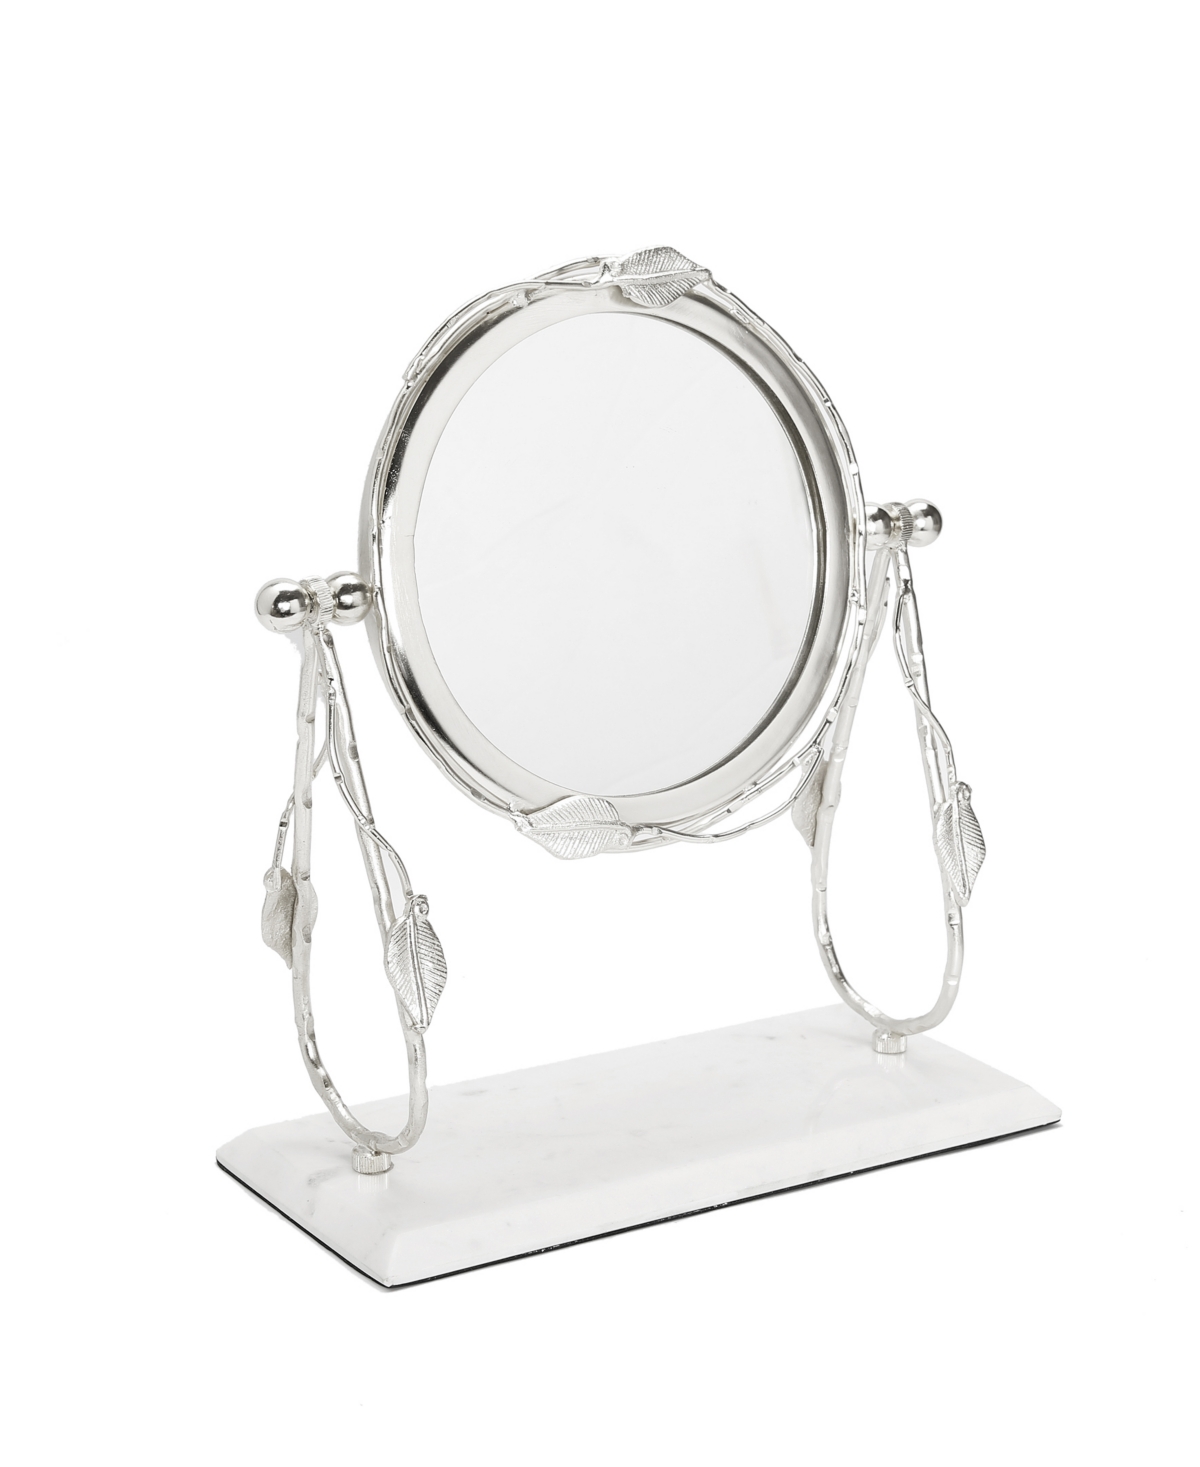 Table Mirror with Leaf Design Border and Marble Base, 4" x 14" - Silver-Tone